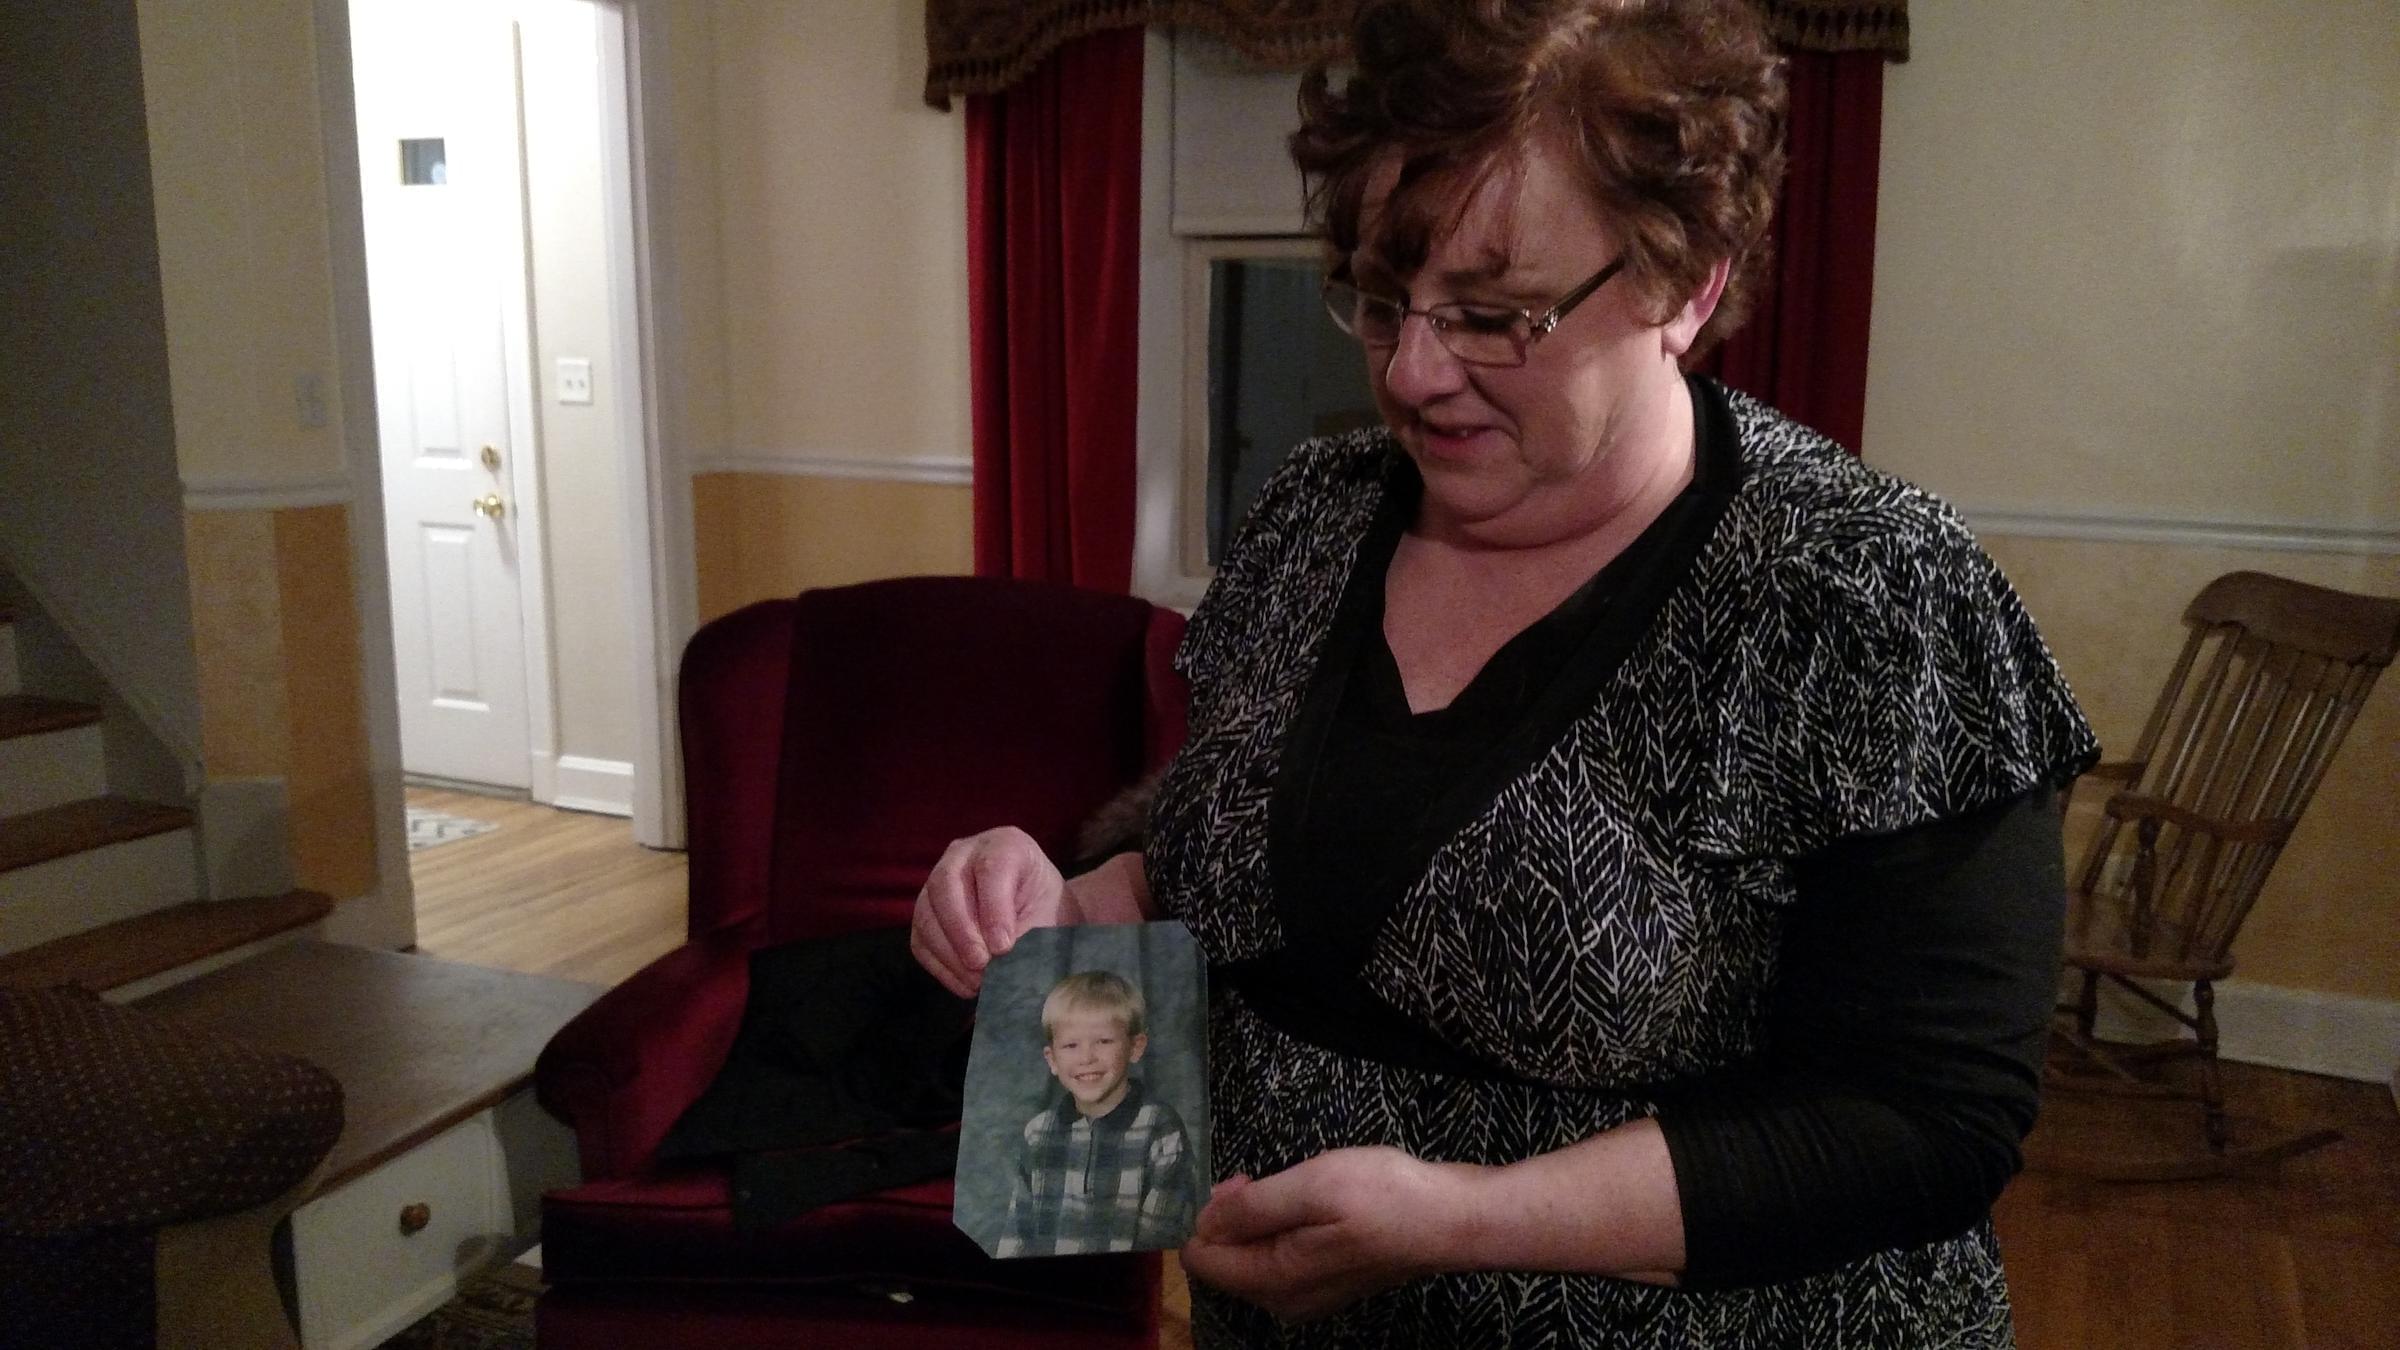 Toni Hoy holds a picture of her son, Daniel, at her home in Rantoul, Illinois. In a last-ditch effort to get Daniel treatment for his severe mental illness, they gave him up to the state in 2008, when he was 12.